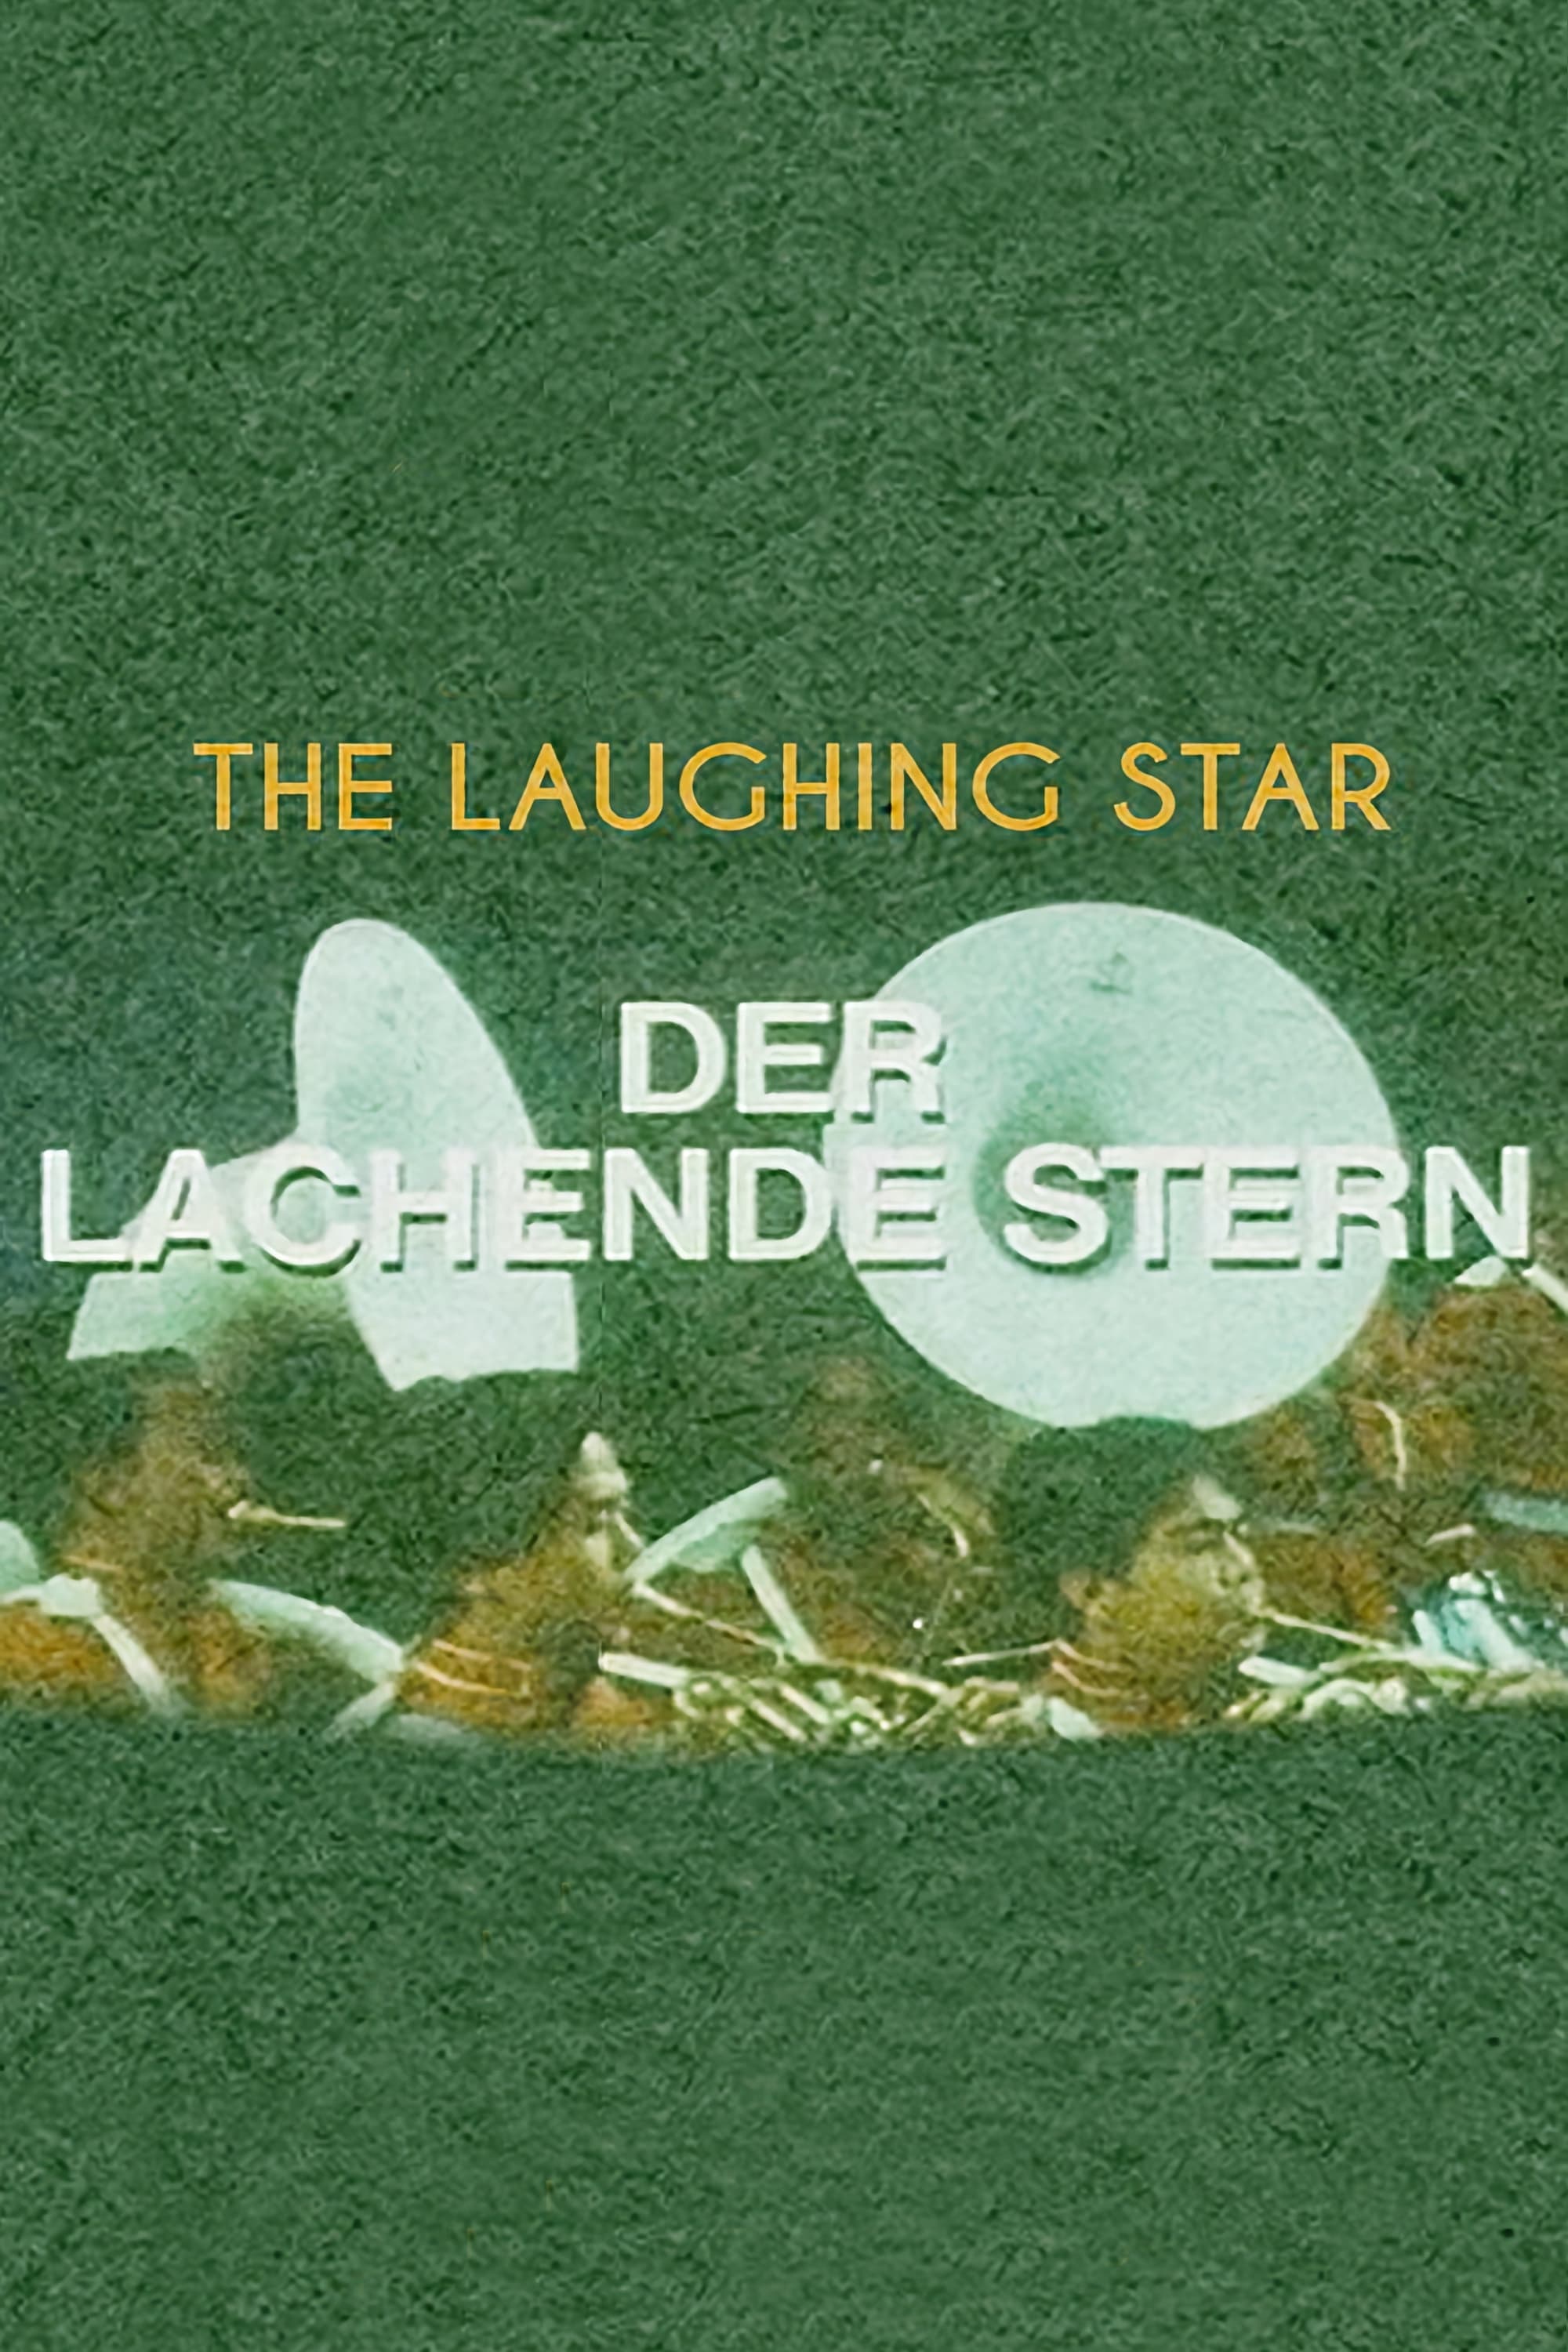 The Laughing Star